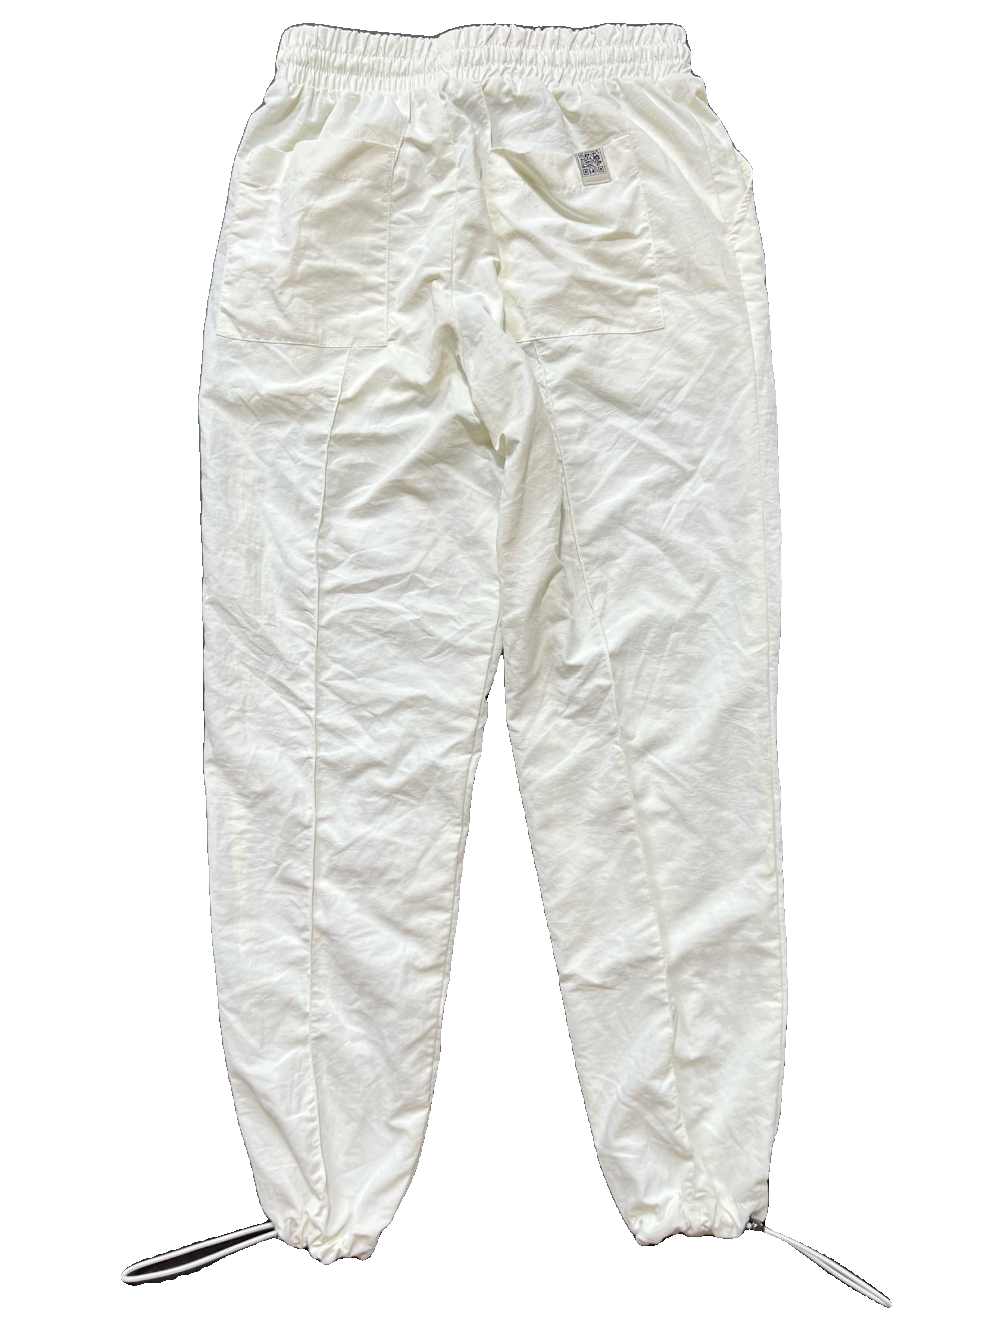 The Giving Movement - White Cargo Pants